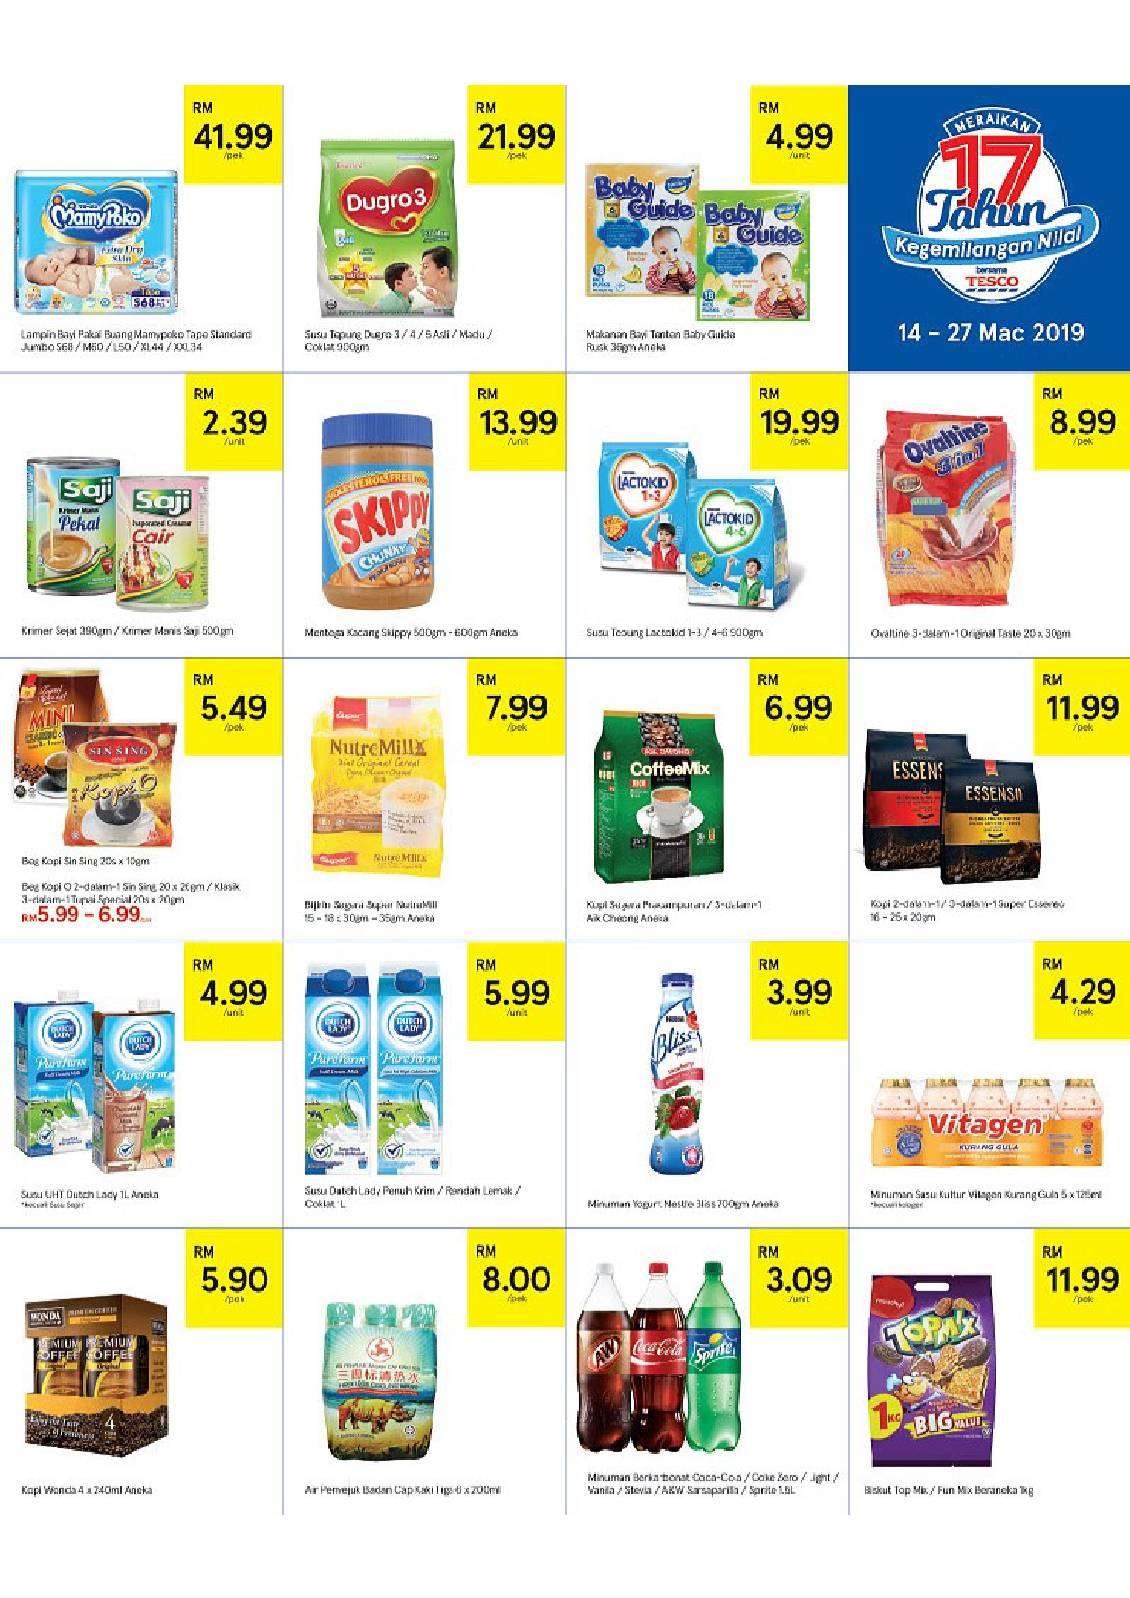 Tesco Malaysia Weekly Catalogue (14 March 2019 - 20 March 2019)